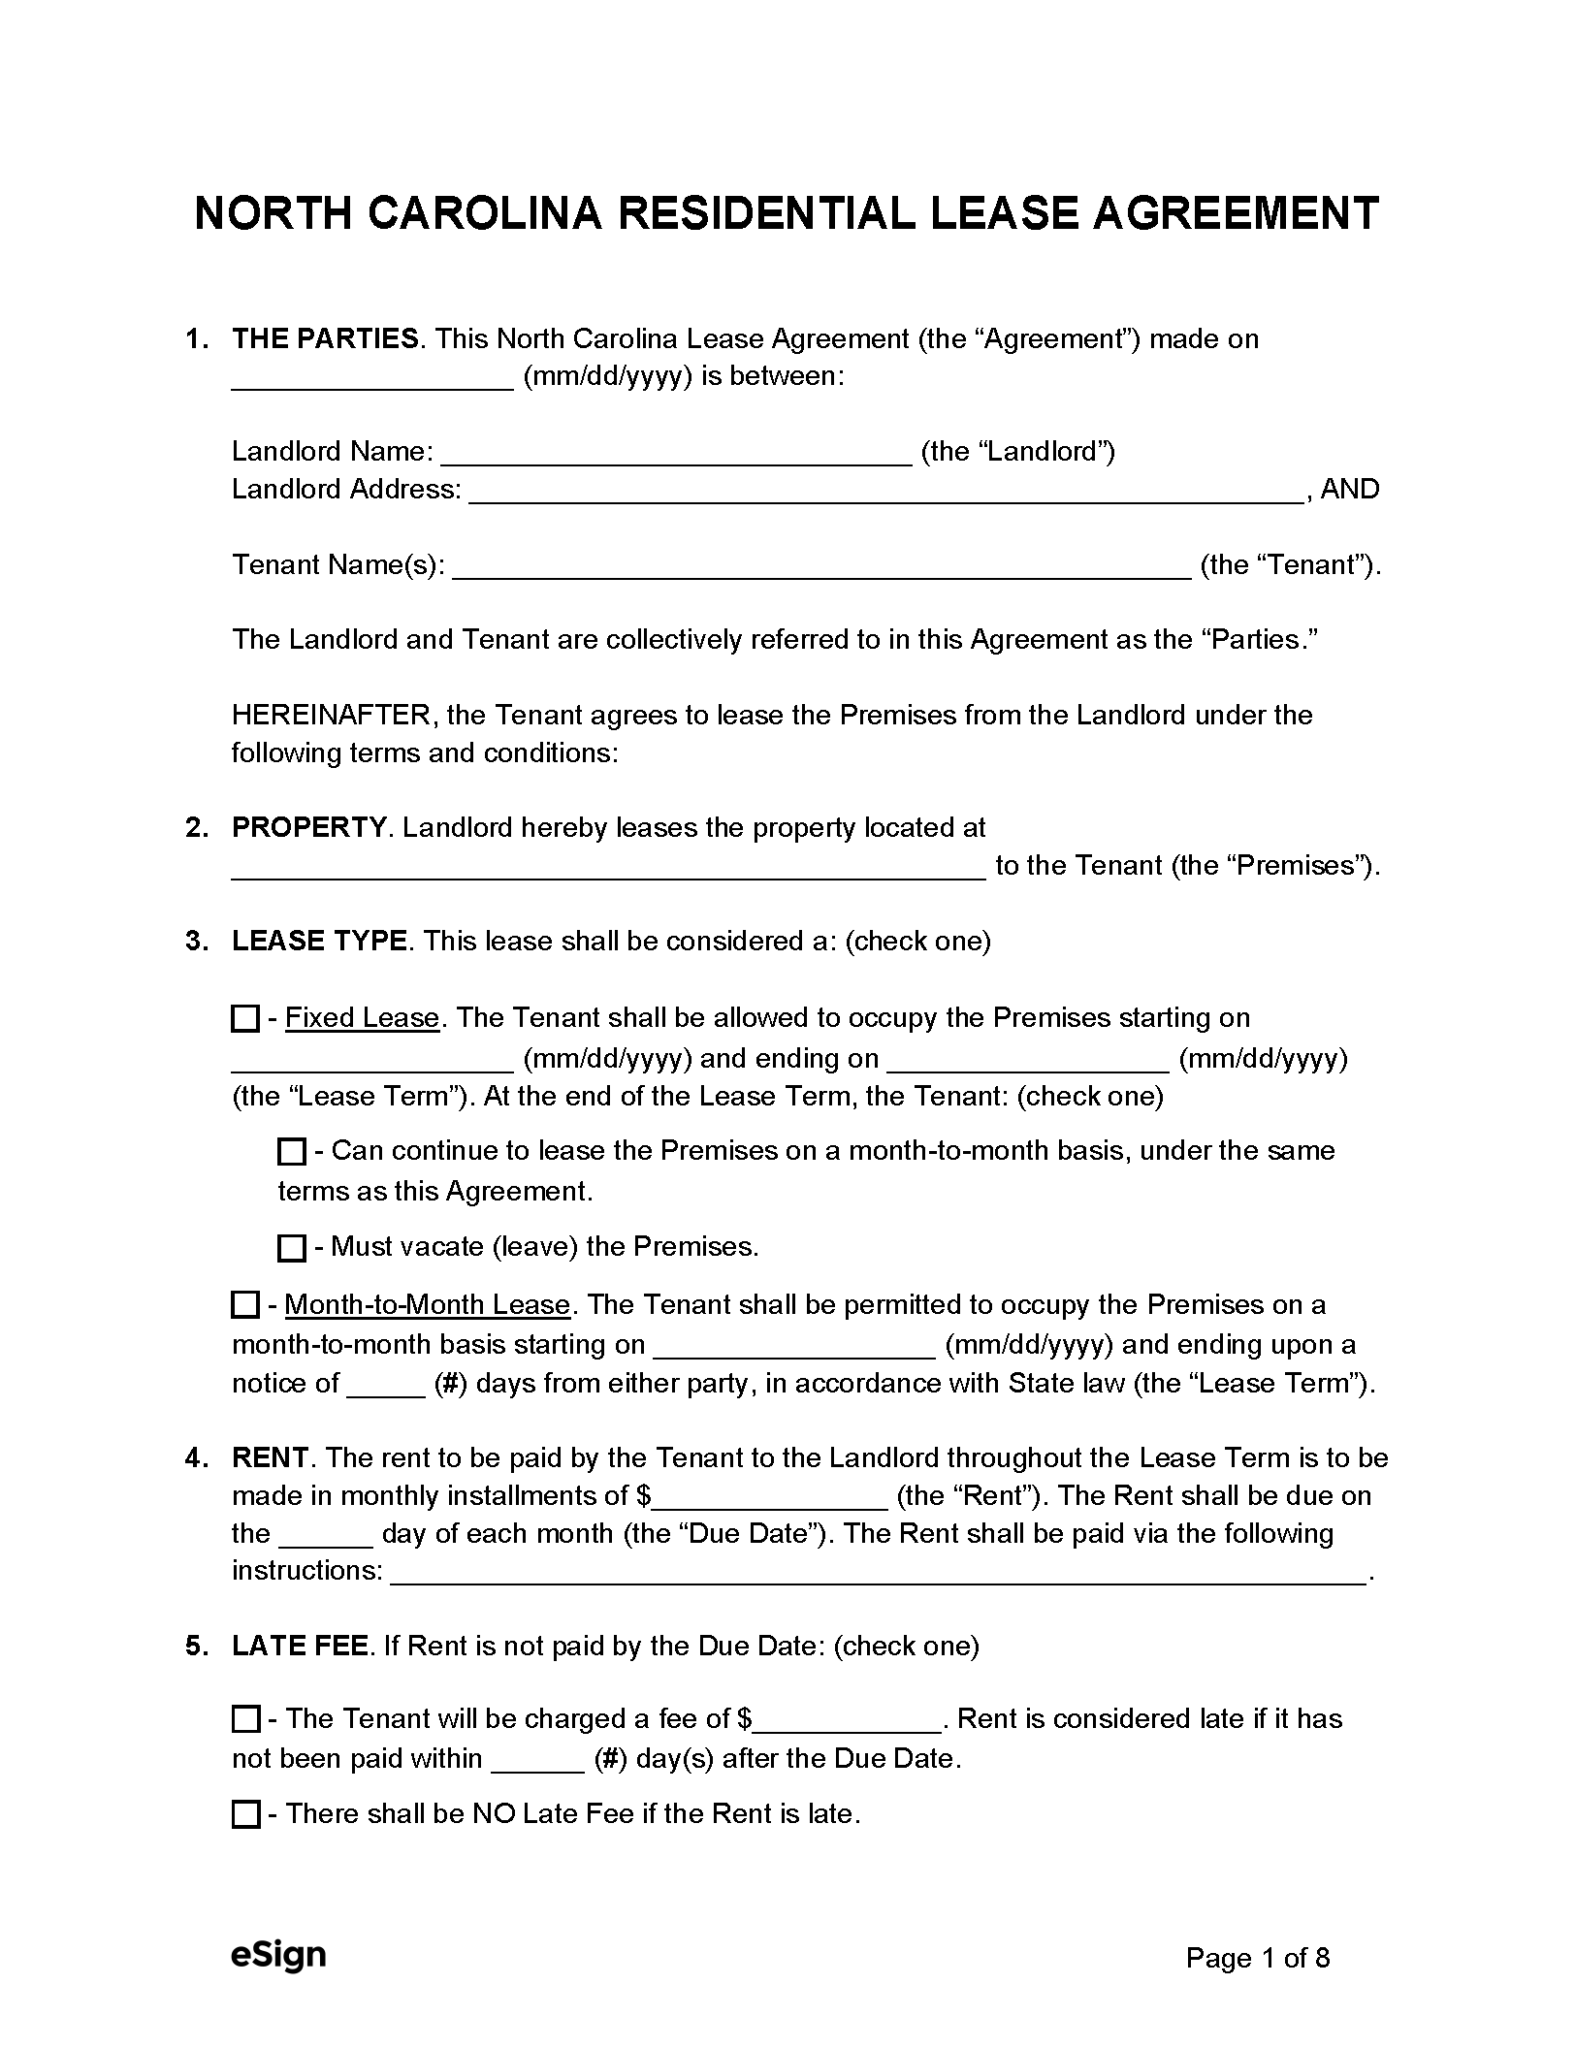 free-louisiana-standard-residential-lease-agreement-template-pdf-word